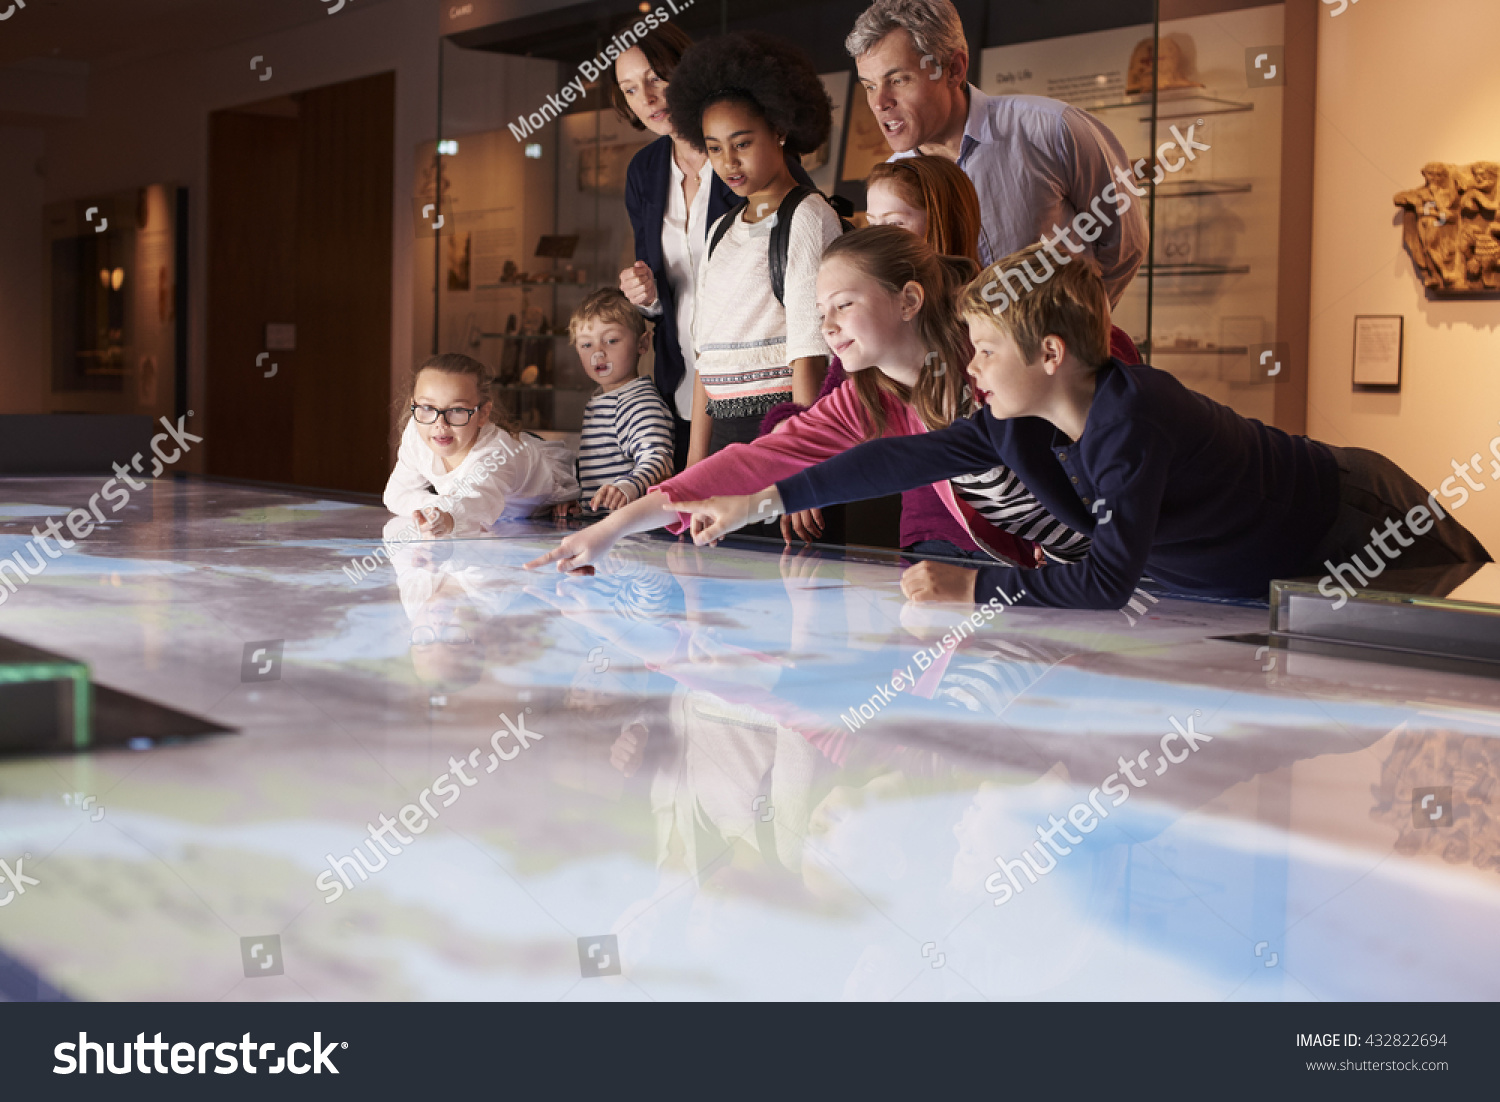 Stock Photo Pupils On School Field Trip To Museum Looking At Map 432822694 